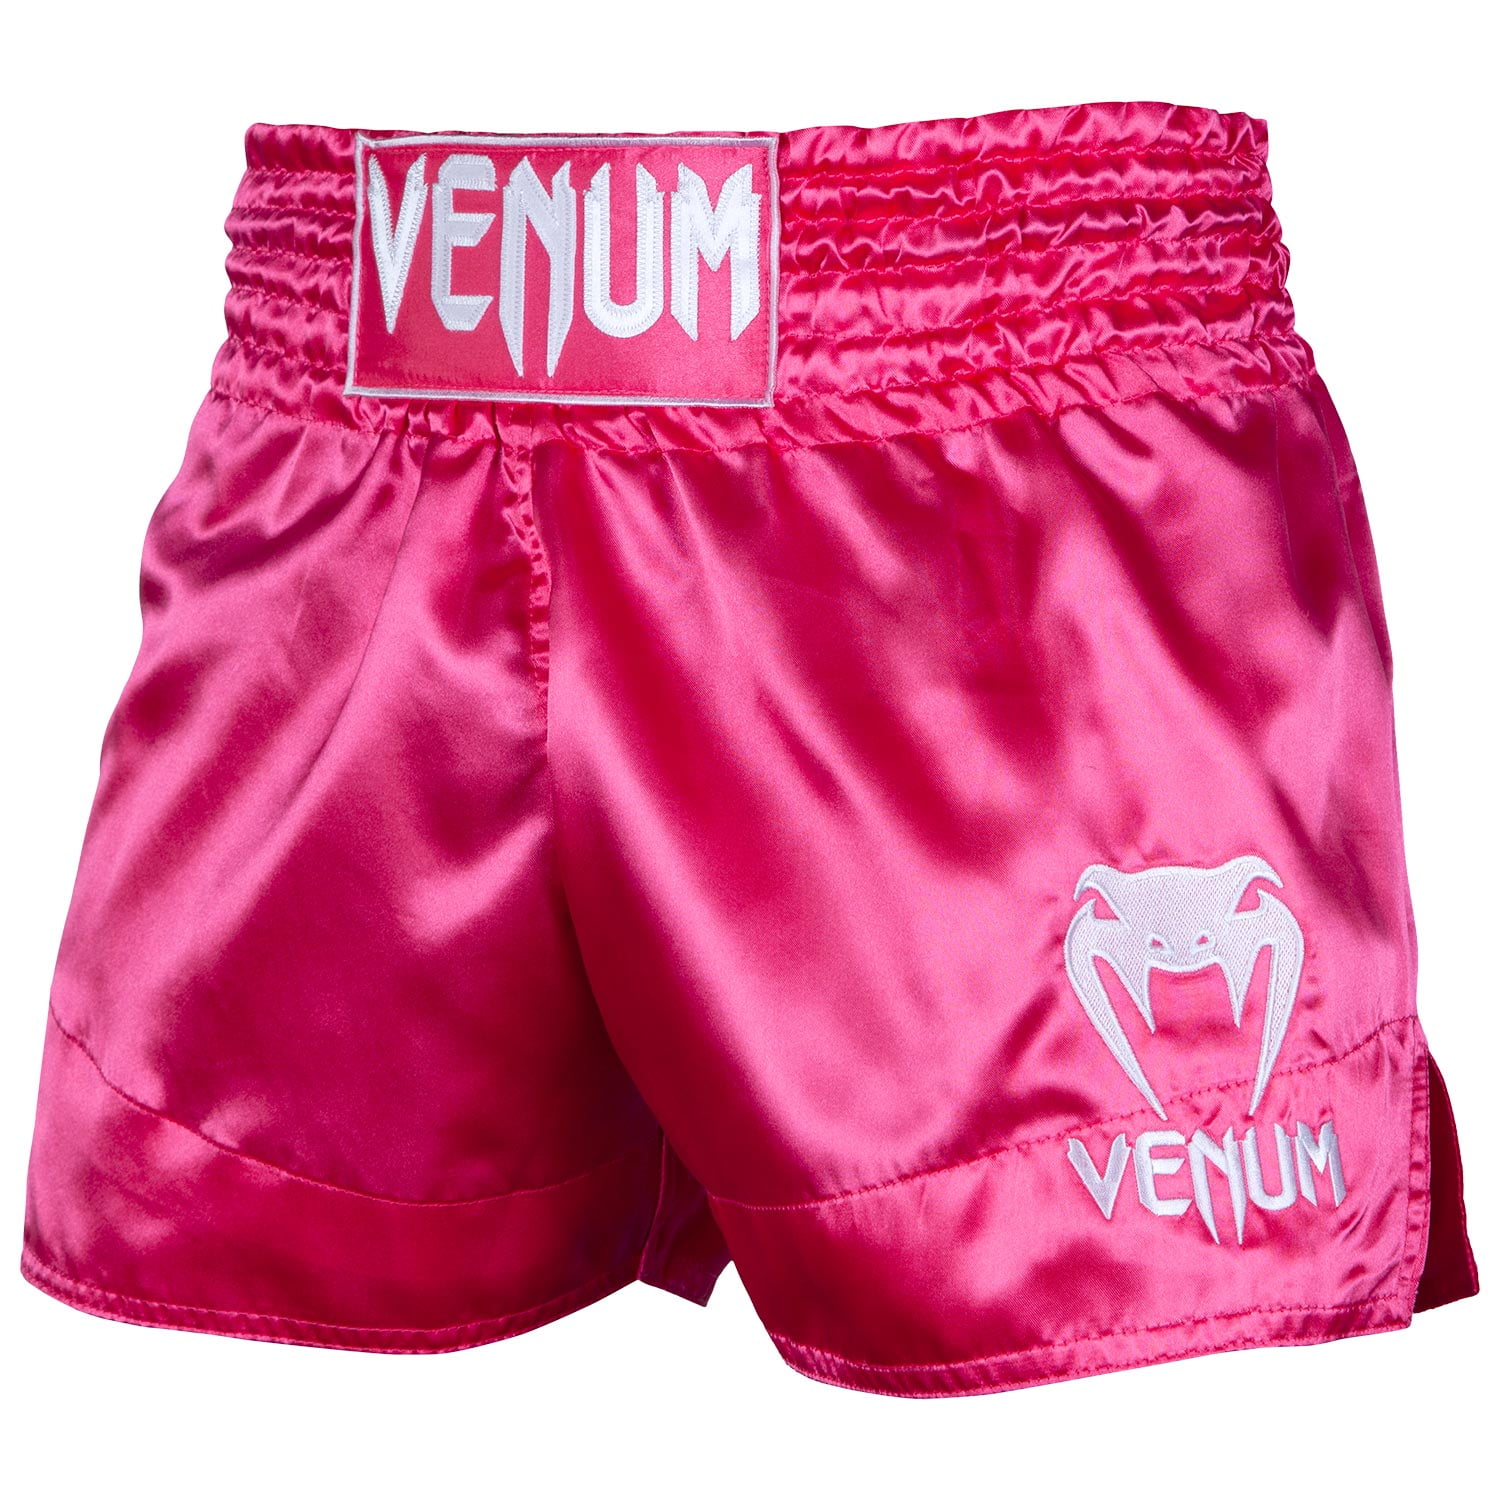 LITE PINK SHORTS TRUNKS FOR MARTIAL ARTS SPORTS Kids XS - XL Adults 